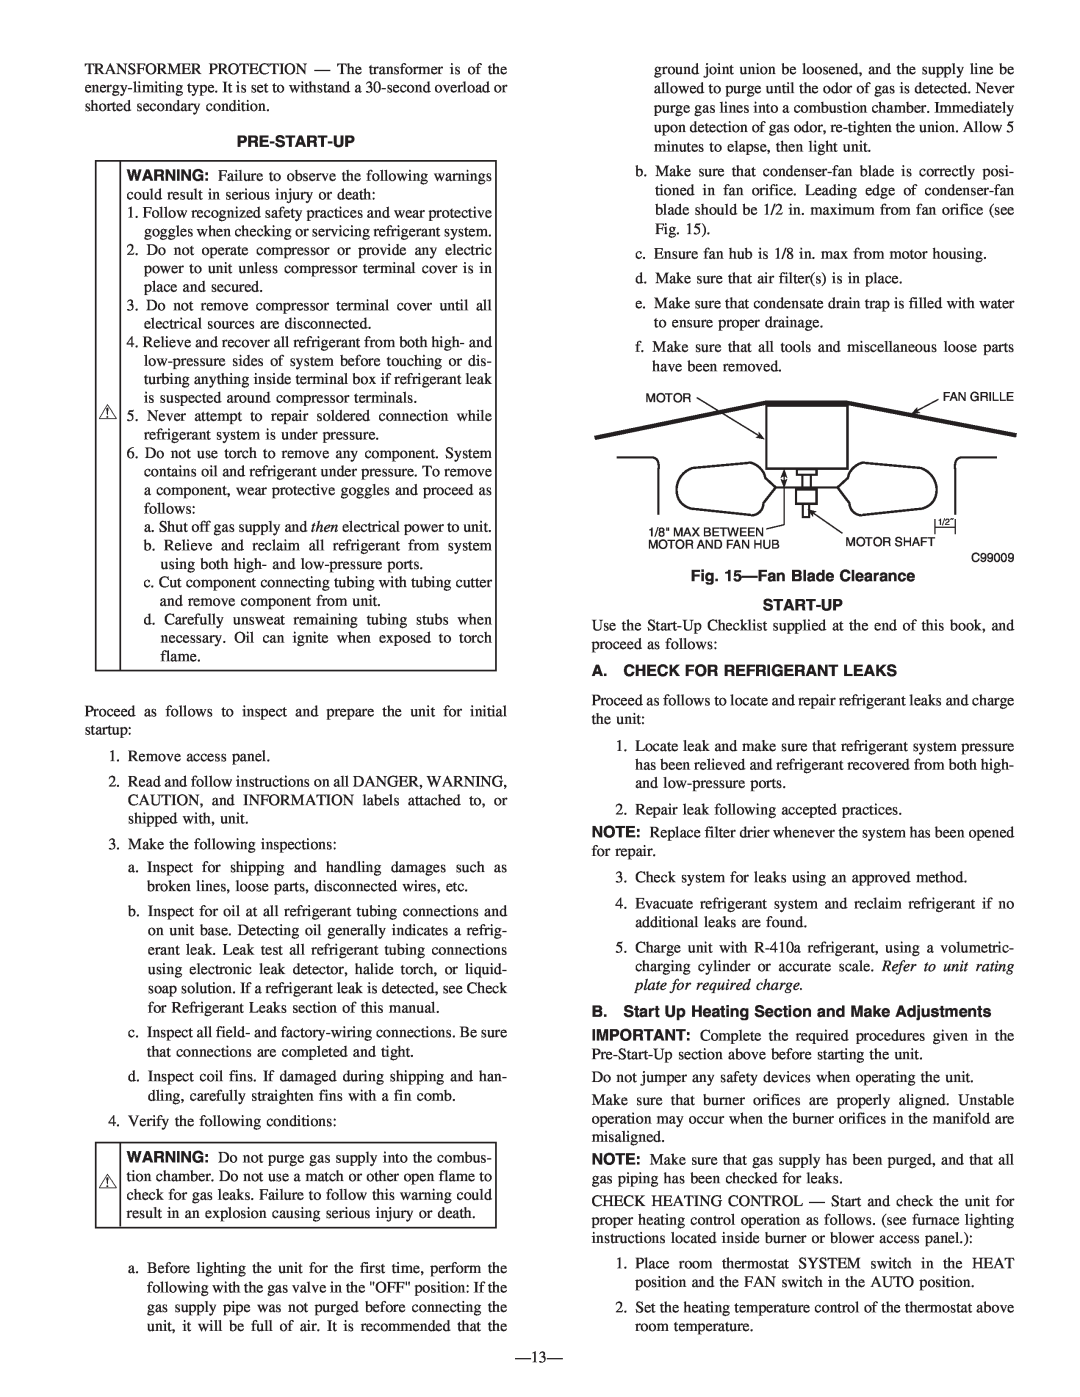 Bryant 583B instruction manual Pre-Start-Up, FanBlade Clearance START-UP, A. Check For Refrigerant Leaks 